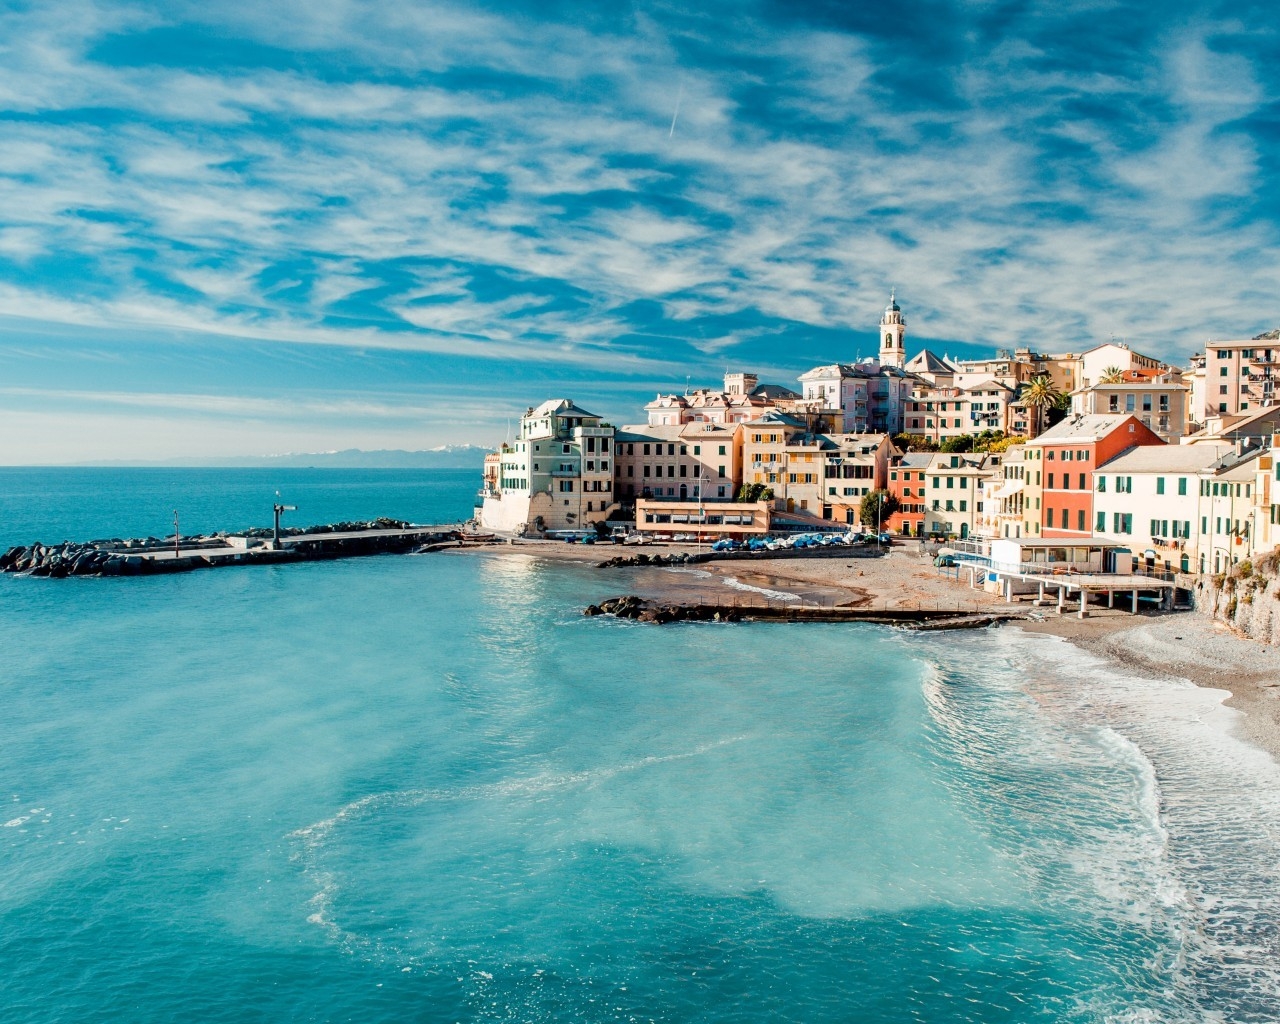 The Cinque Terre View for 1280 x 1024 resolution